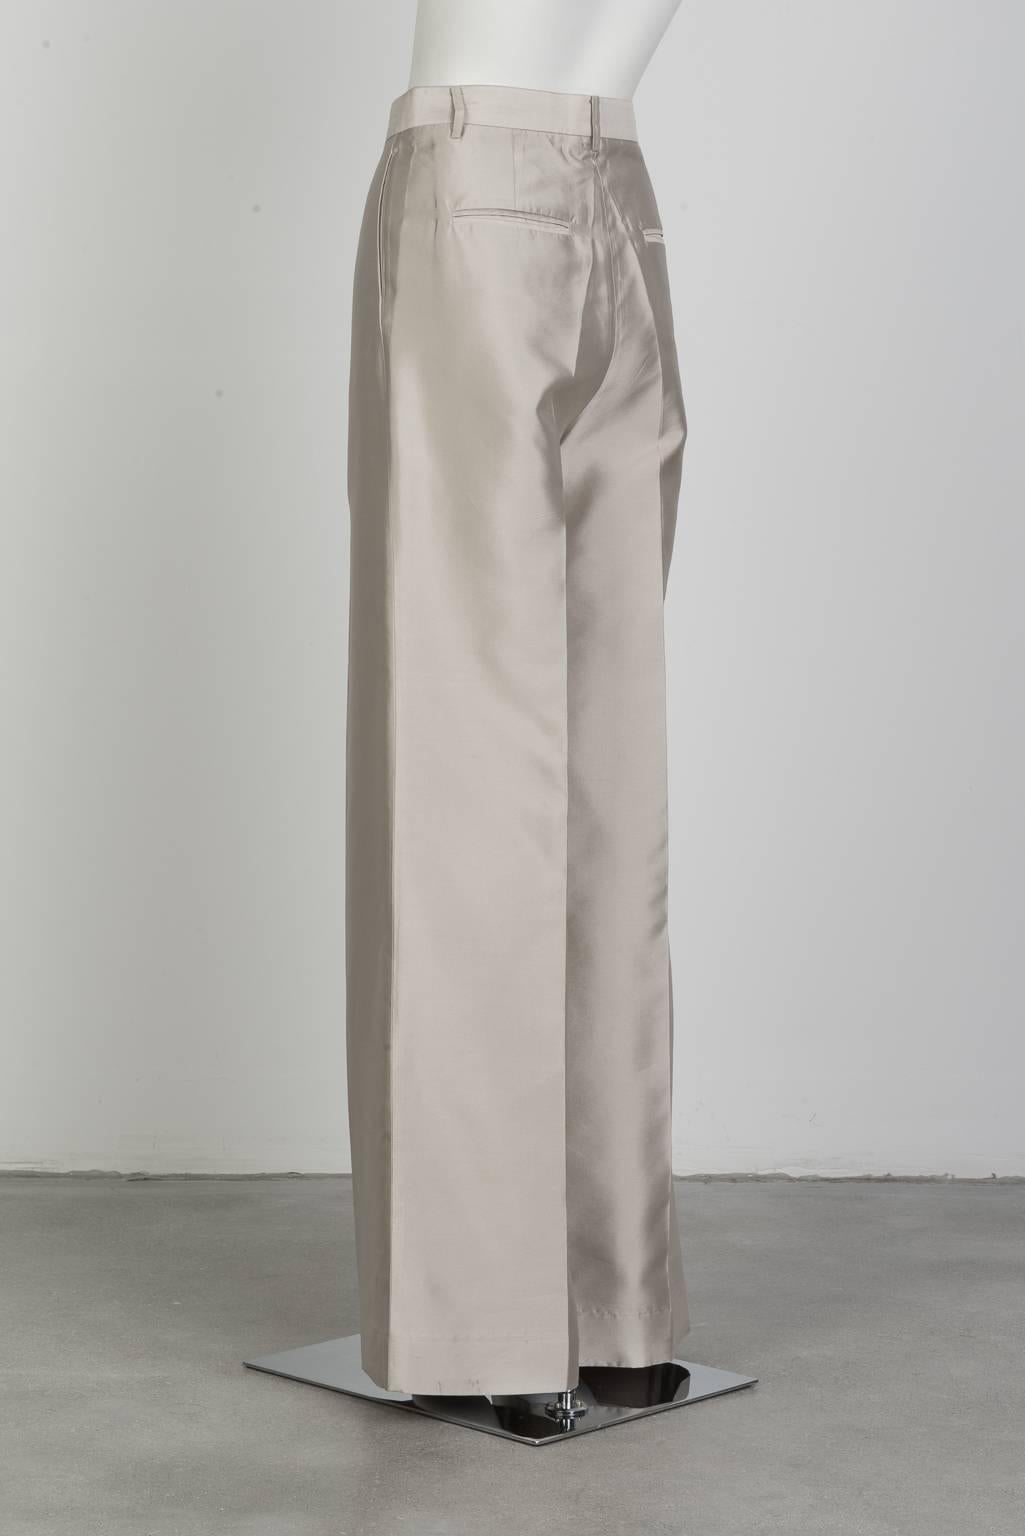 Ms MIN Tailored Pant In New Condition For Sale In Xiamen, Fujian